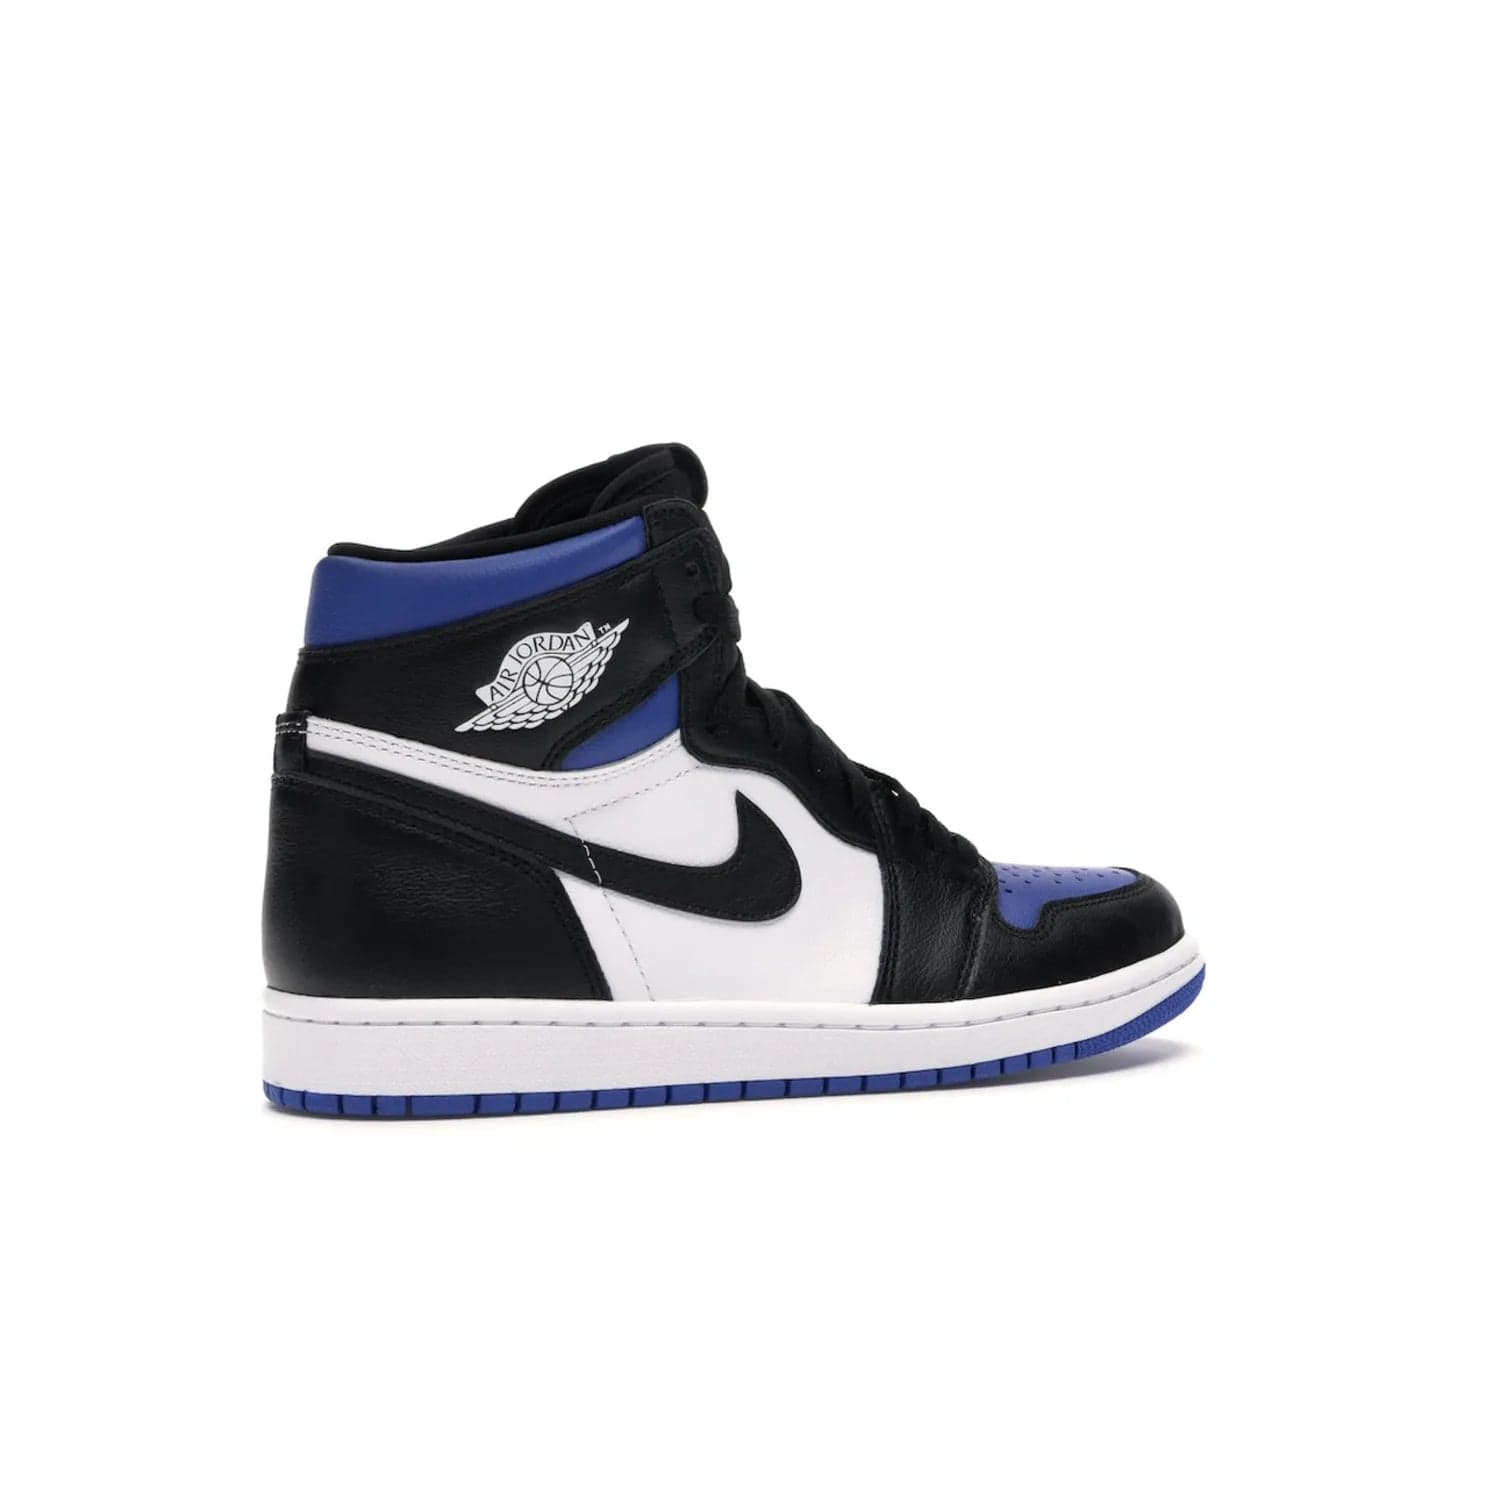 Jordan 1 Retro High Royal Toe - Image 34 - Only at www.BallersClubKickz.com - Refresh your look with the Jordan 1 Retro High Royal Toe. This classic AJ 1 sports a white and royal leather upper, black leather overlays, and branded leather tongue tag. Pick up today and set the streets ablaze.